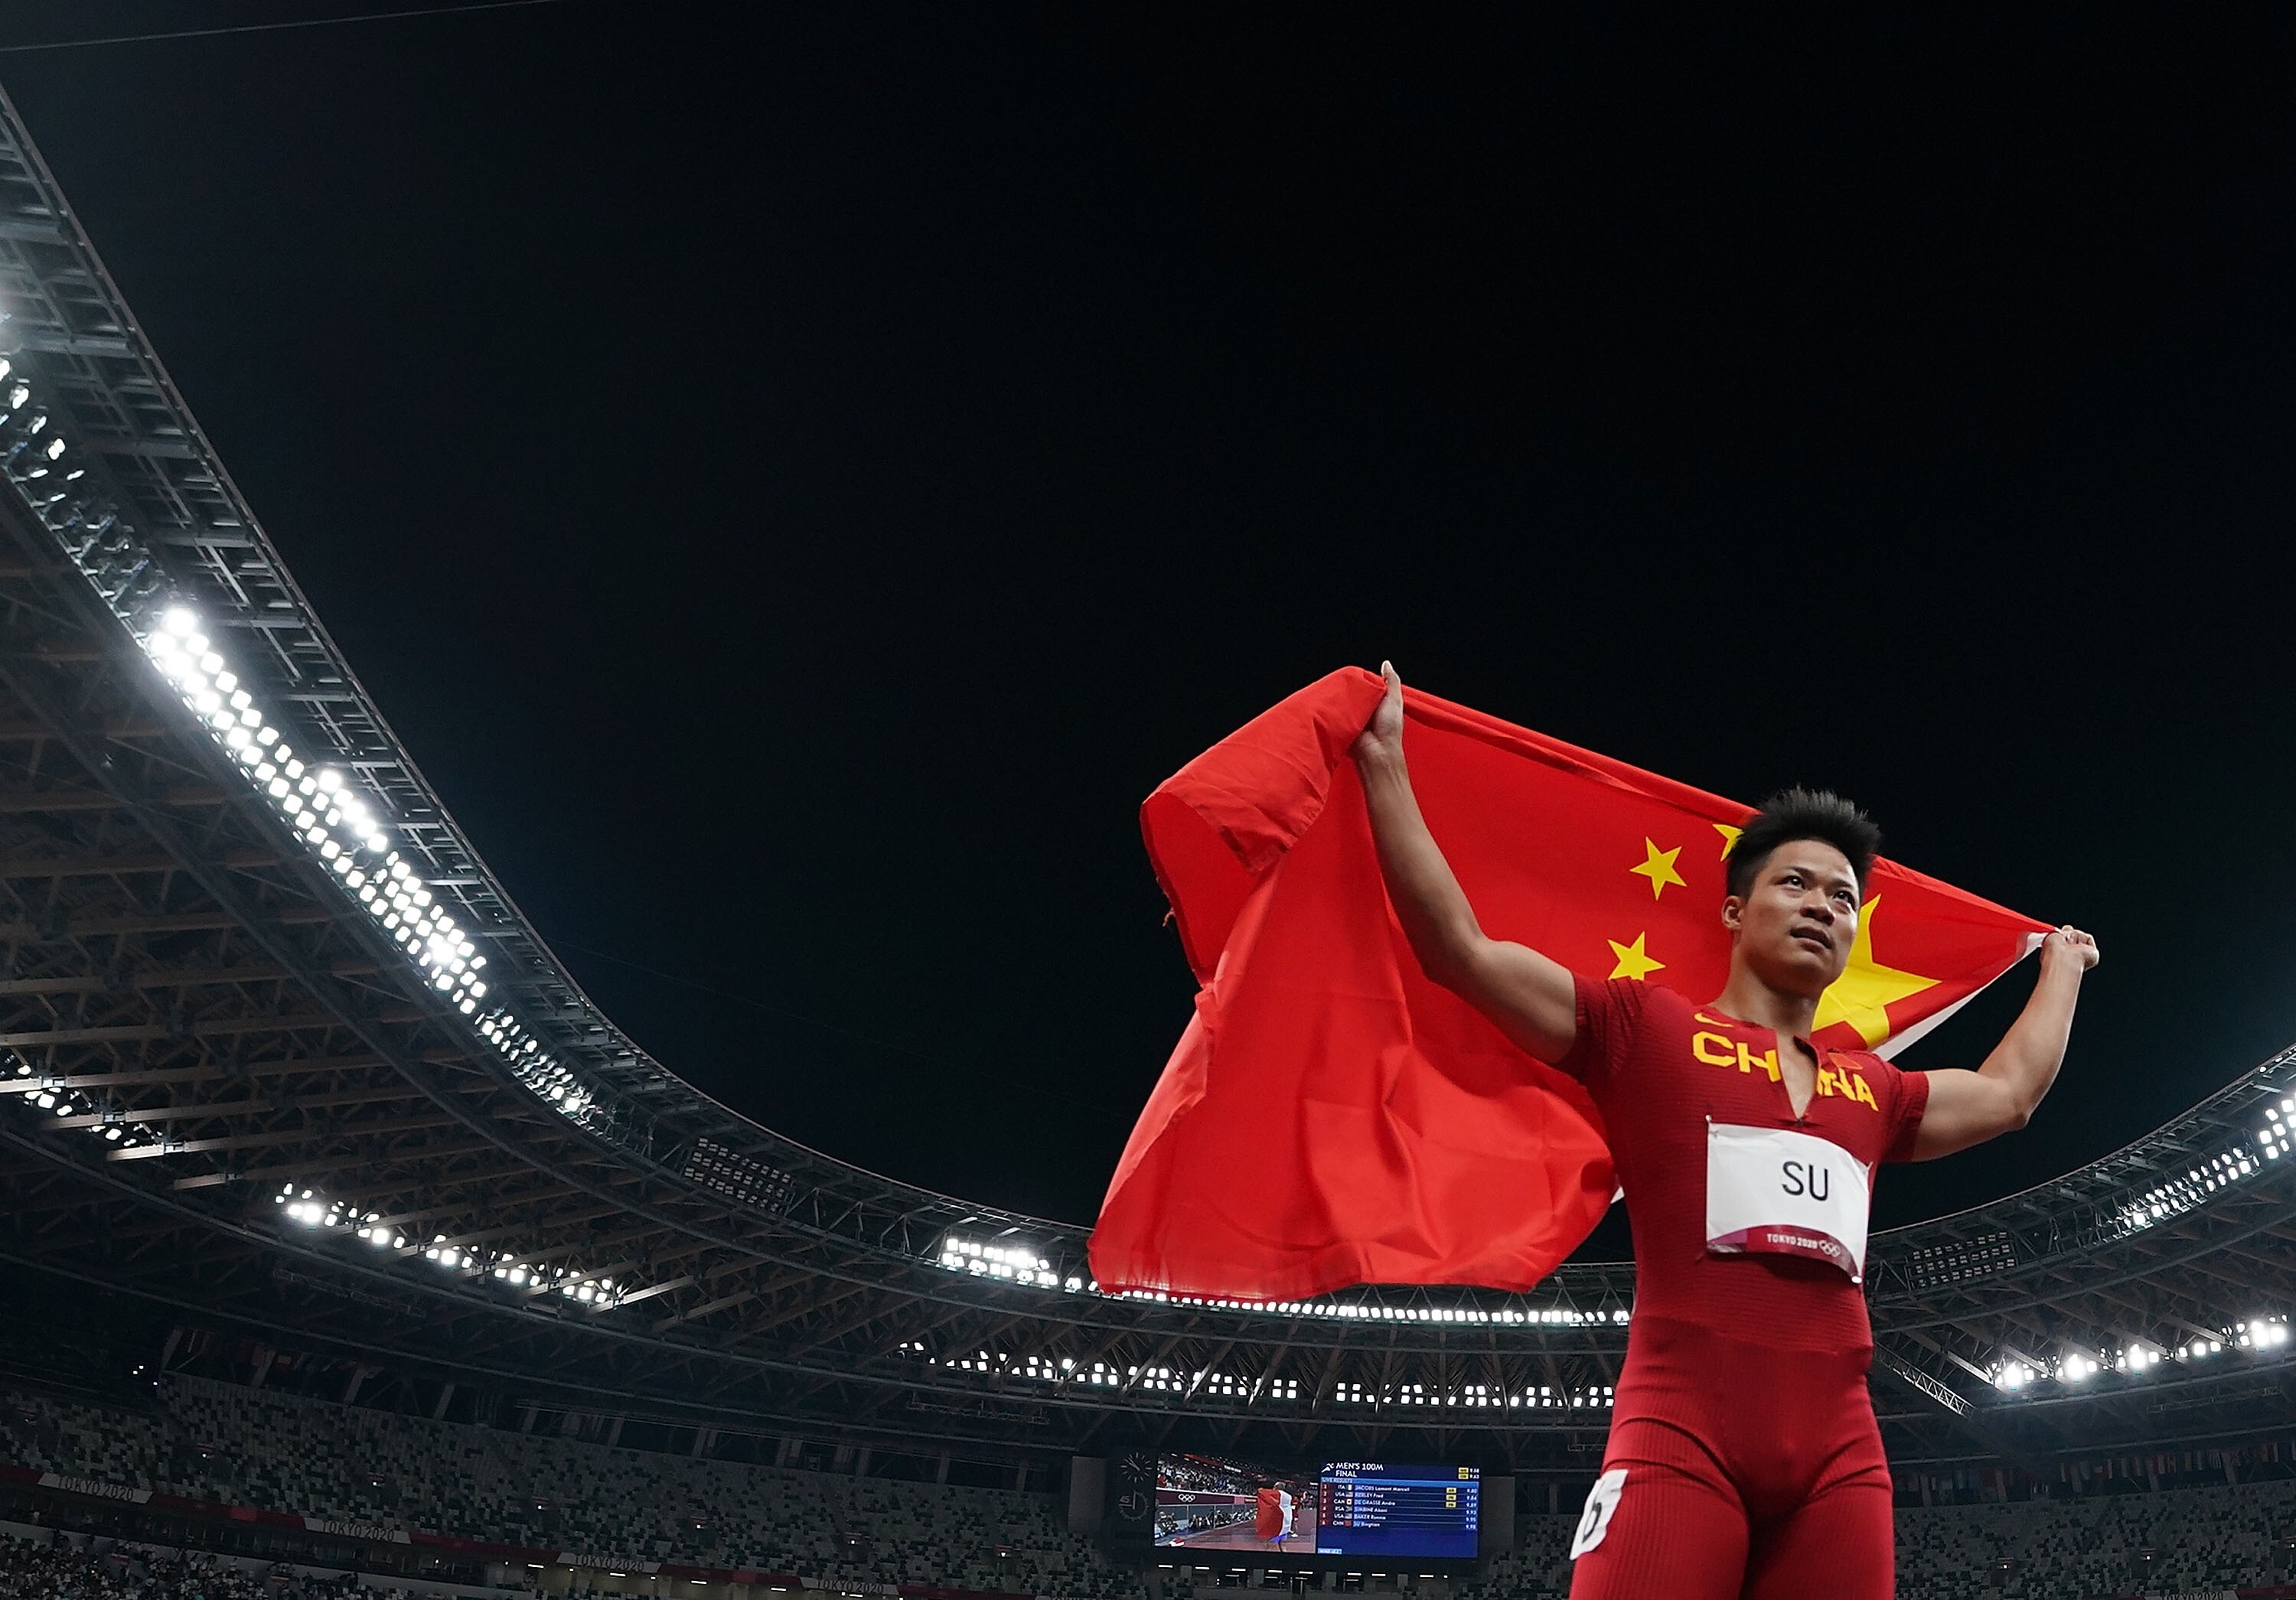 Su celebrates with the Chinese national flag after the men‘s 100m final at the Tokyo 2020 Olympic Games. Photo: Xinhua